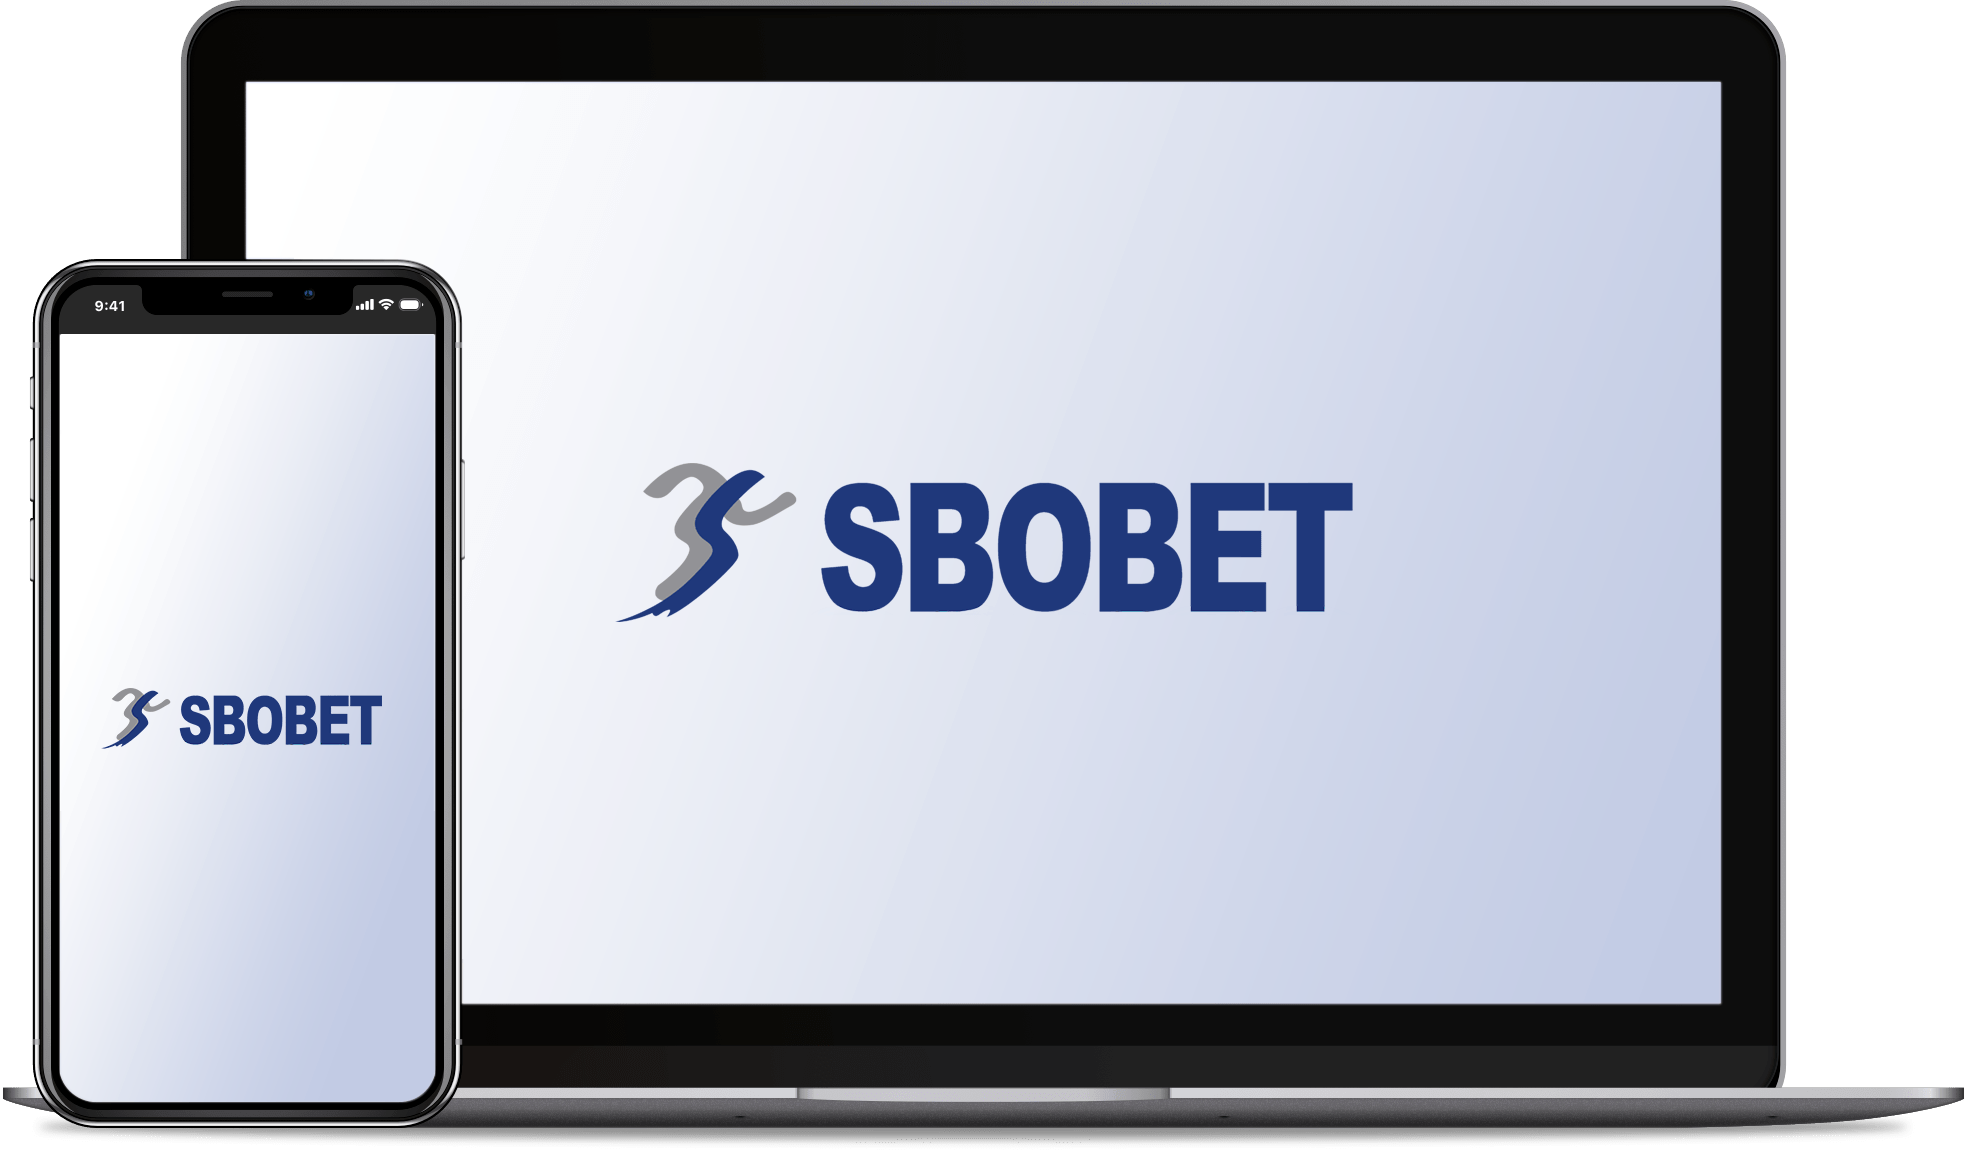 SBOBET assures the entrance (ทาง เข้า so) for iphone post thumbnail image